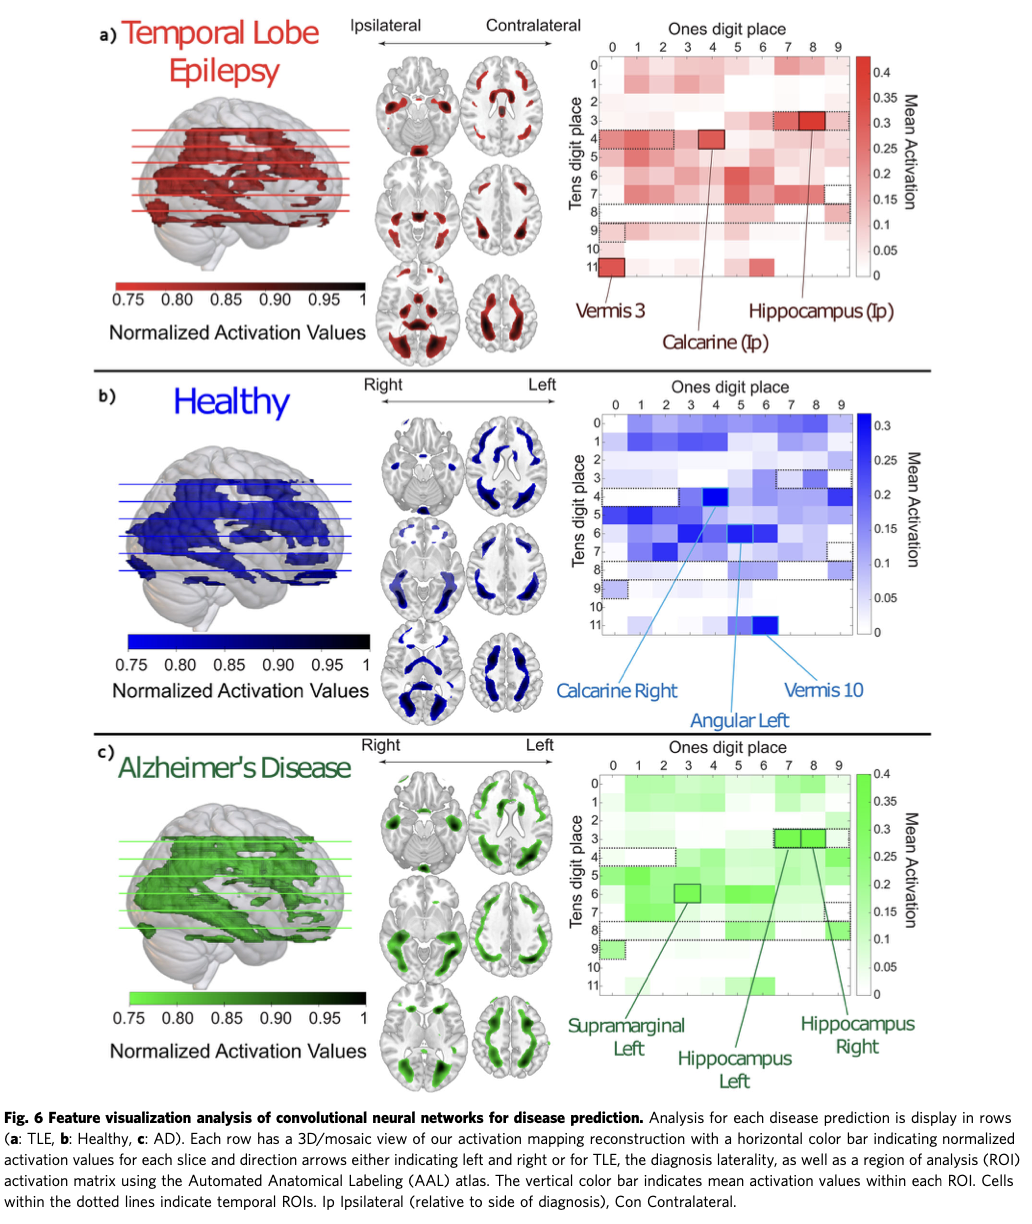 Brain regions whose MRI features are leveraged for disease classification